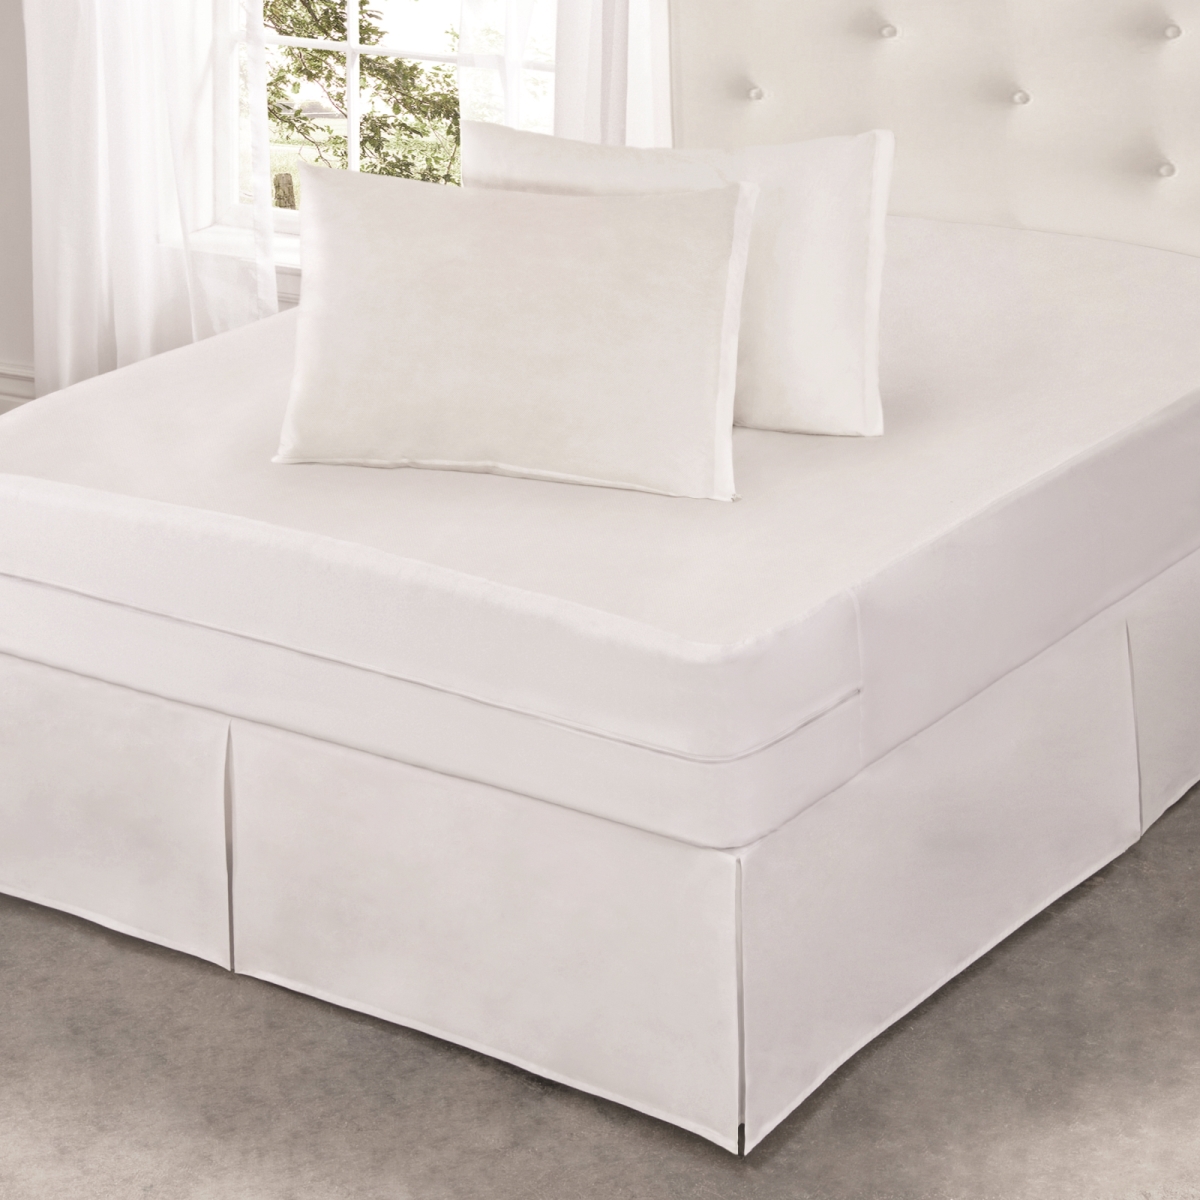 All172xxwhit06 Cool Bamboo Mattress Protector With Bed Bug Blocker, White - Twin Size & Extra Large